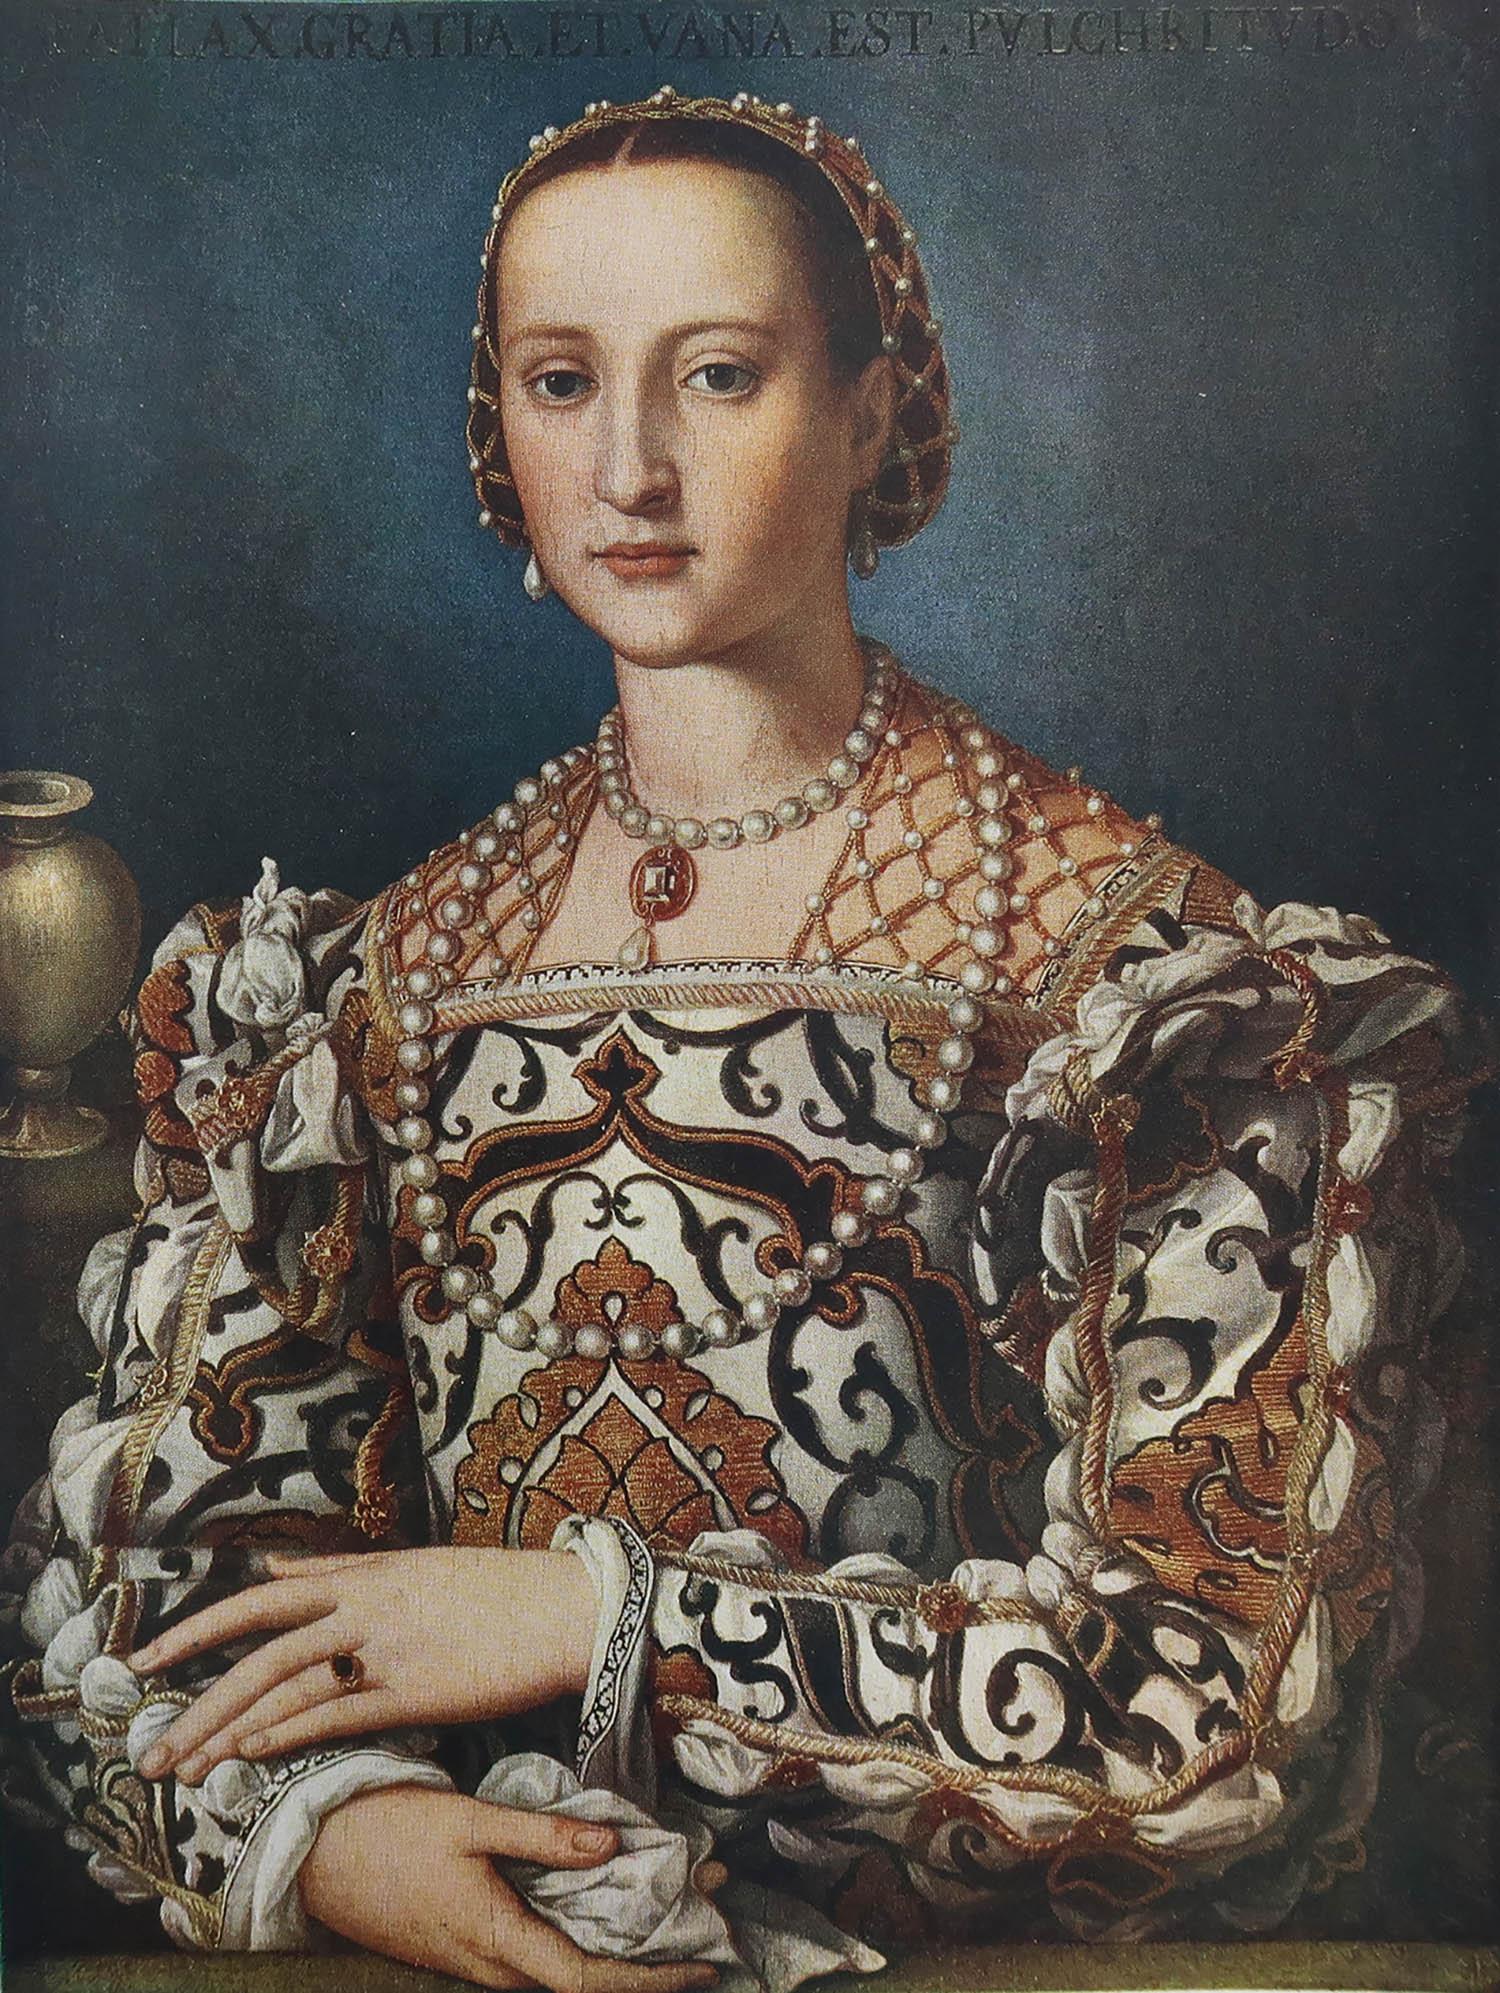 Great image of Eleanoro Di Toledo, Grand Duchess of Tuscany

After Bronzino

Chromo-lithograph 

Published by The Connoisseur, C.1900

Unframed.